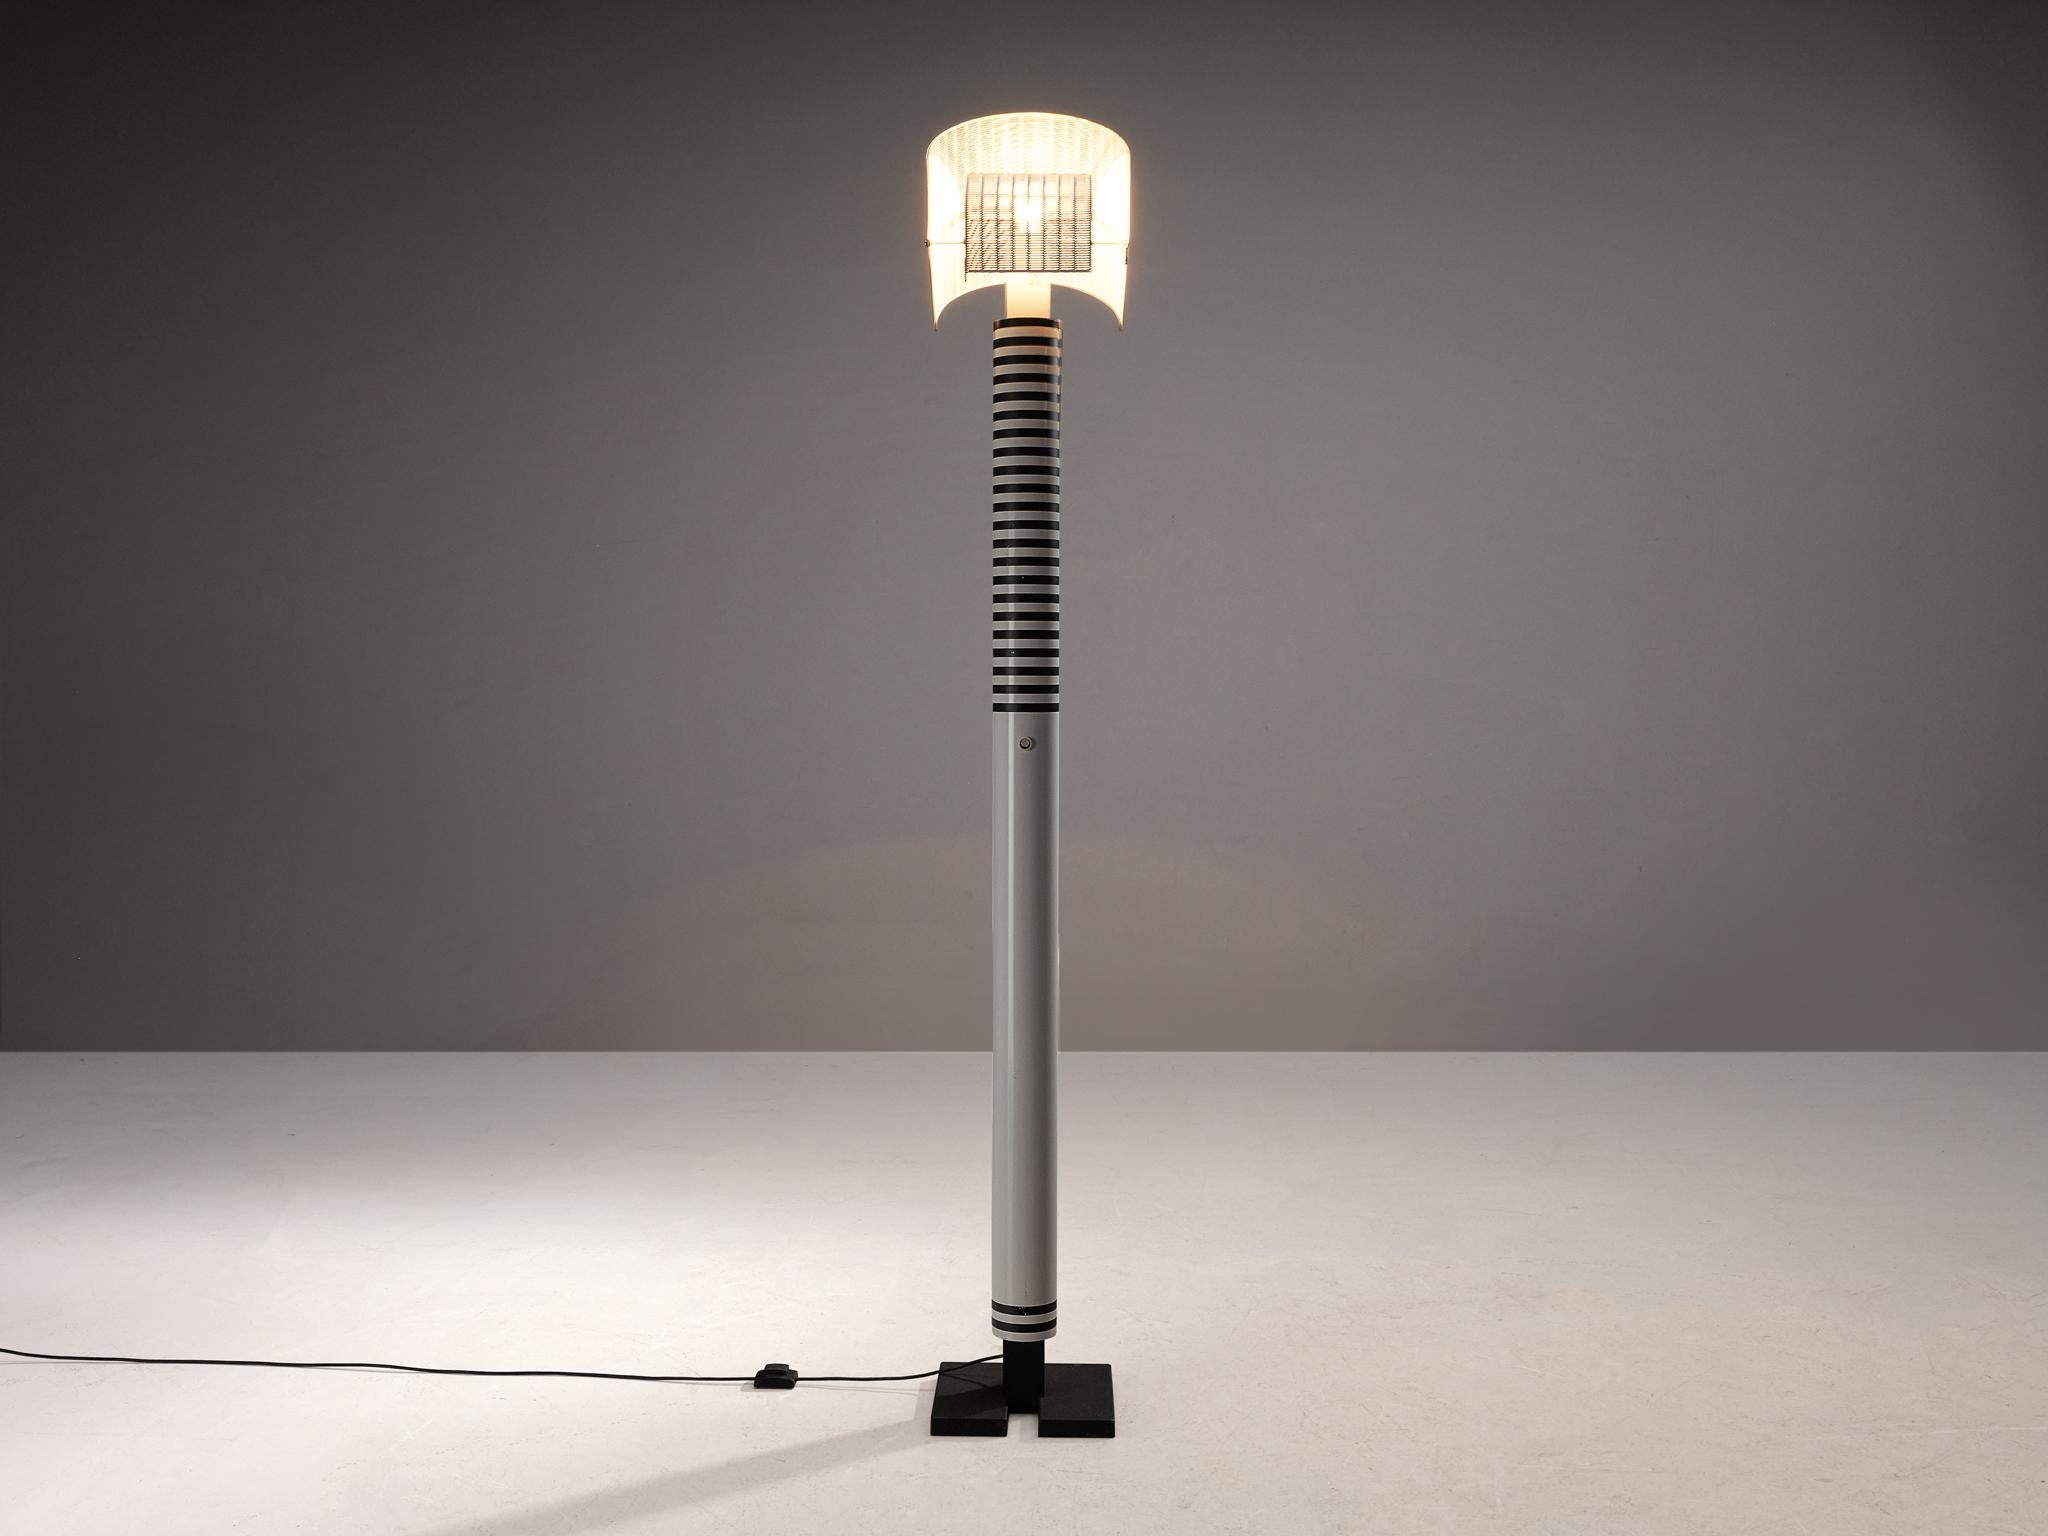 Mario Botta for Artemide, 'Shogun' floor lamp, aluminum, steel, Italy, 1986 

Mario Botta referred to lamps as “people”. He said “Shogun is a person. He has a head, body and feet, plus he has a navel.” The designer is known for his use of geometric